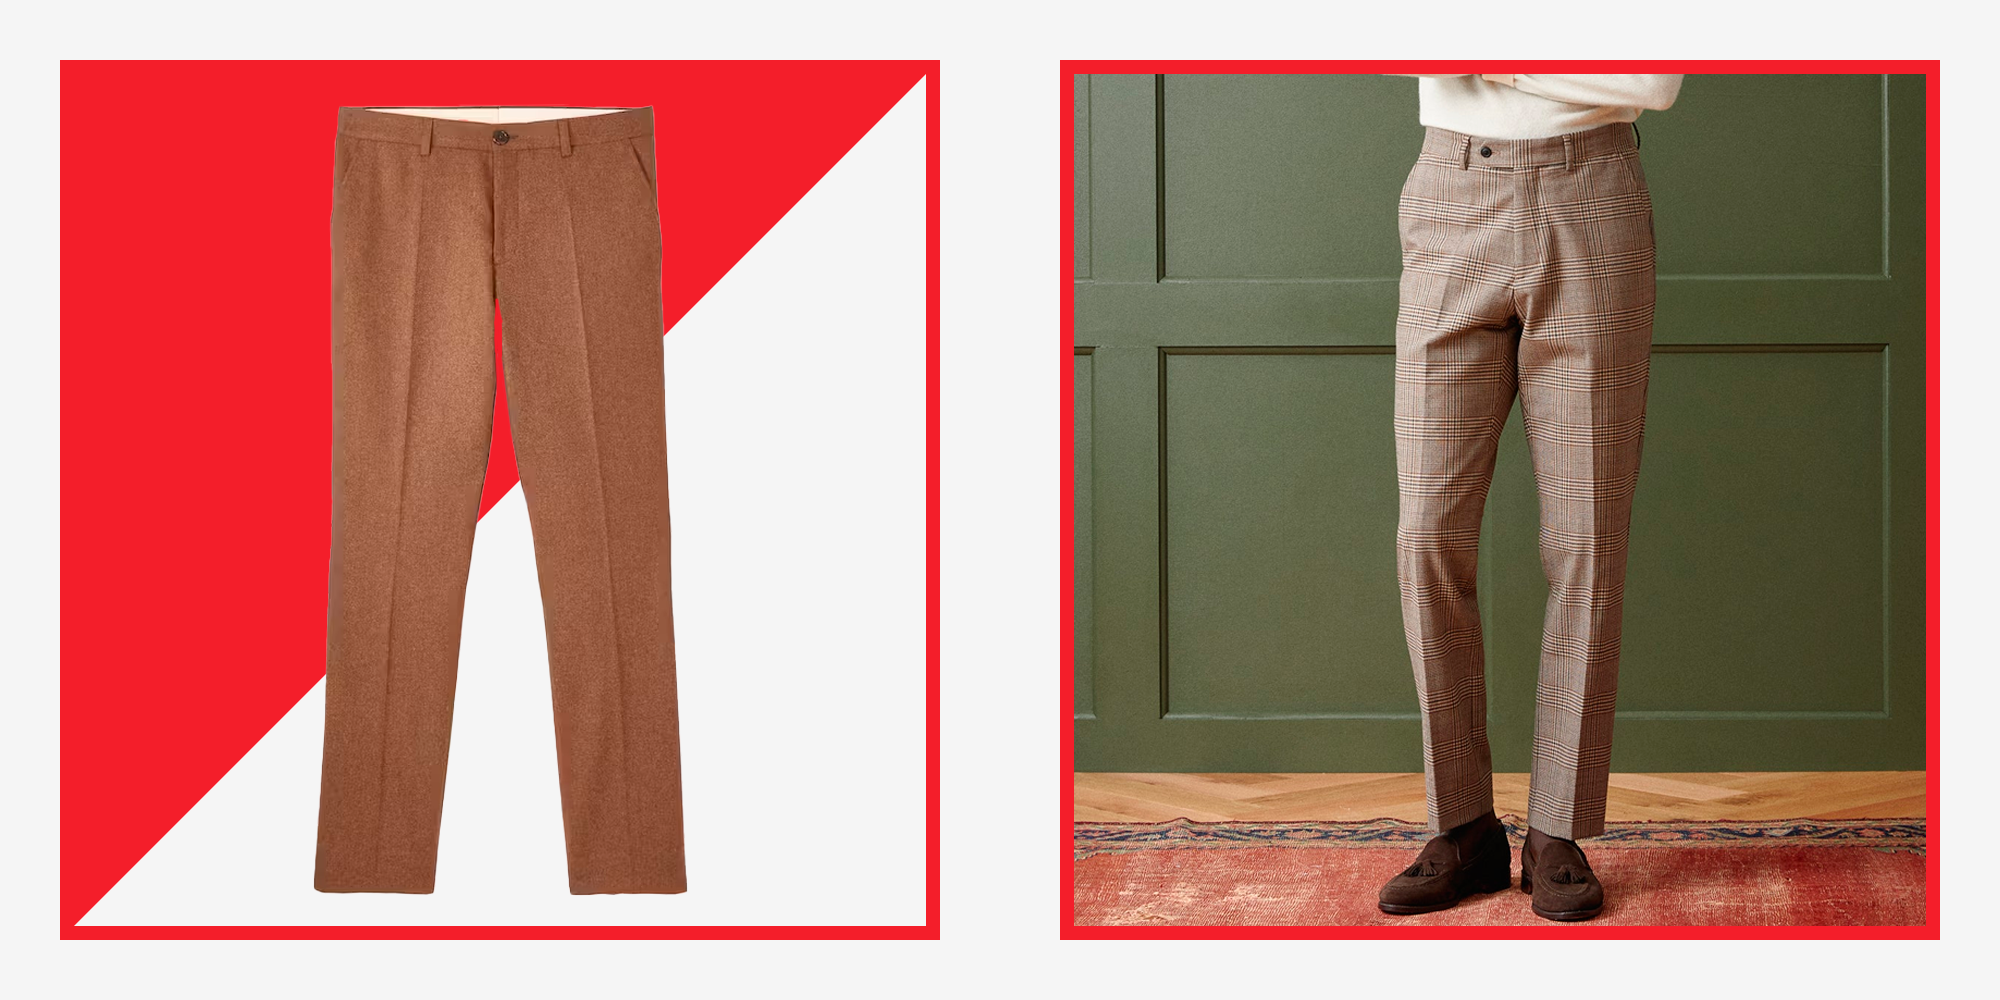 Types of Pants for Men: Styles for Every Occasion